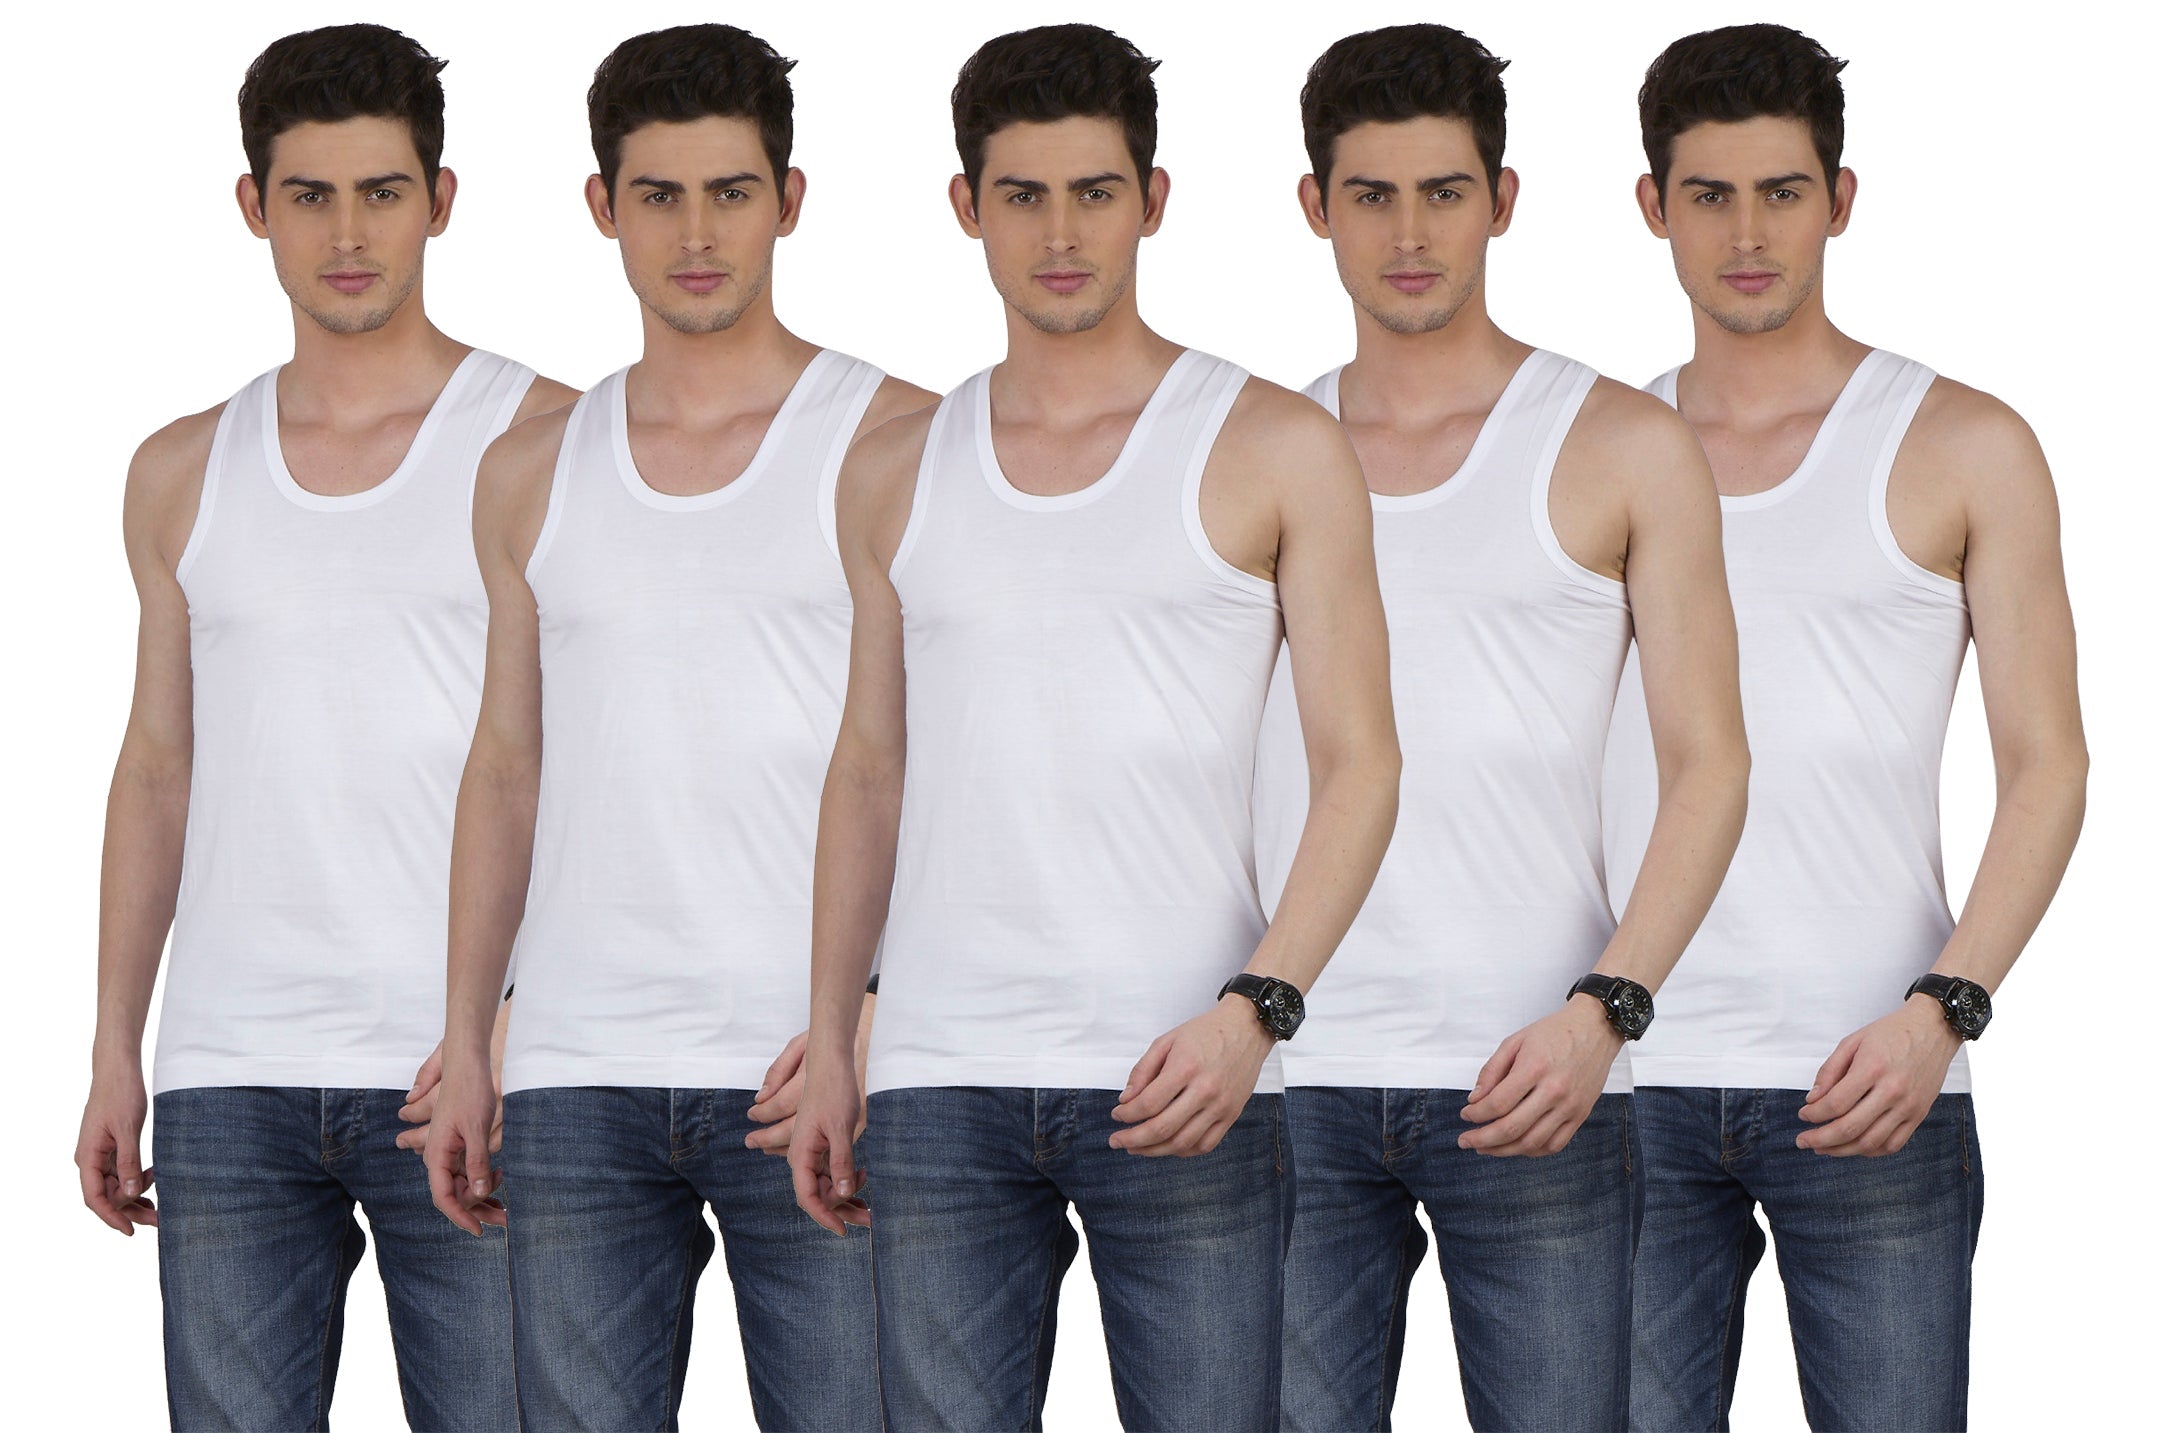 IDEAL Sleeveless White Vest for Men 100% Pure Combed Cotton & U-Neck Pack of 5